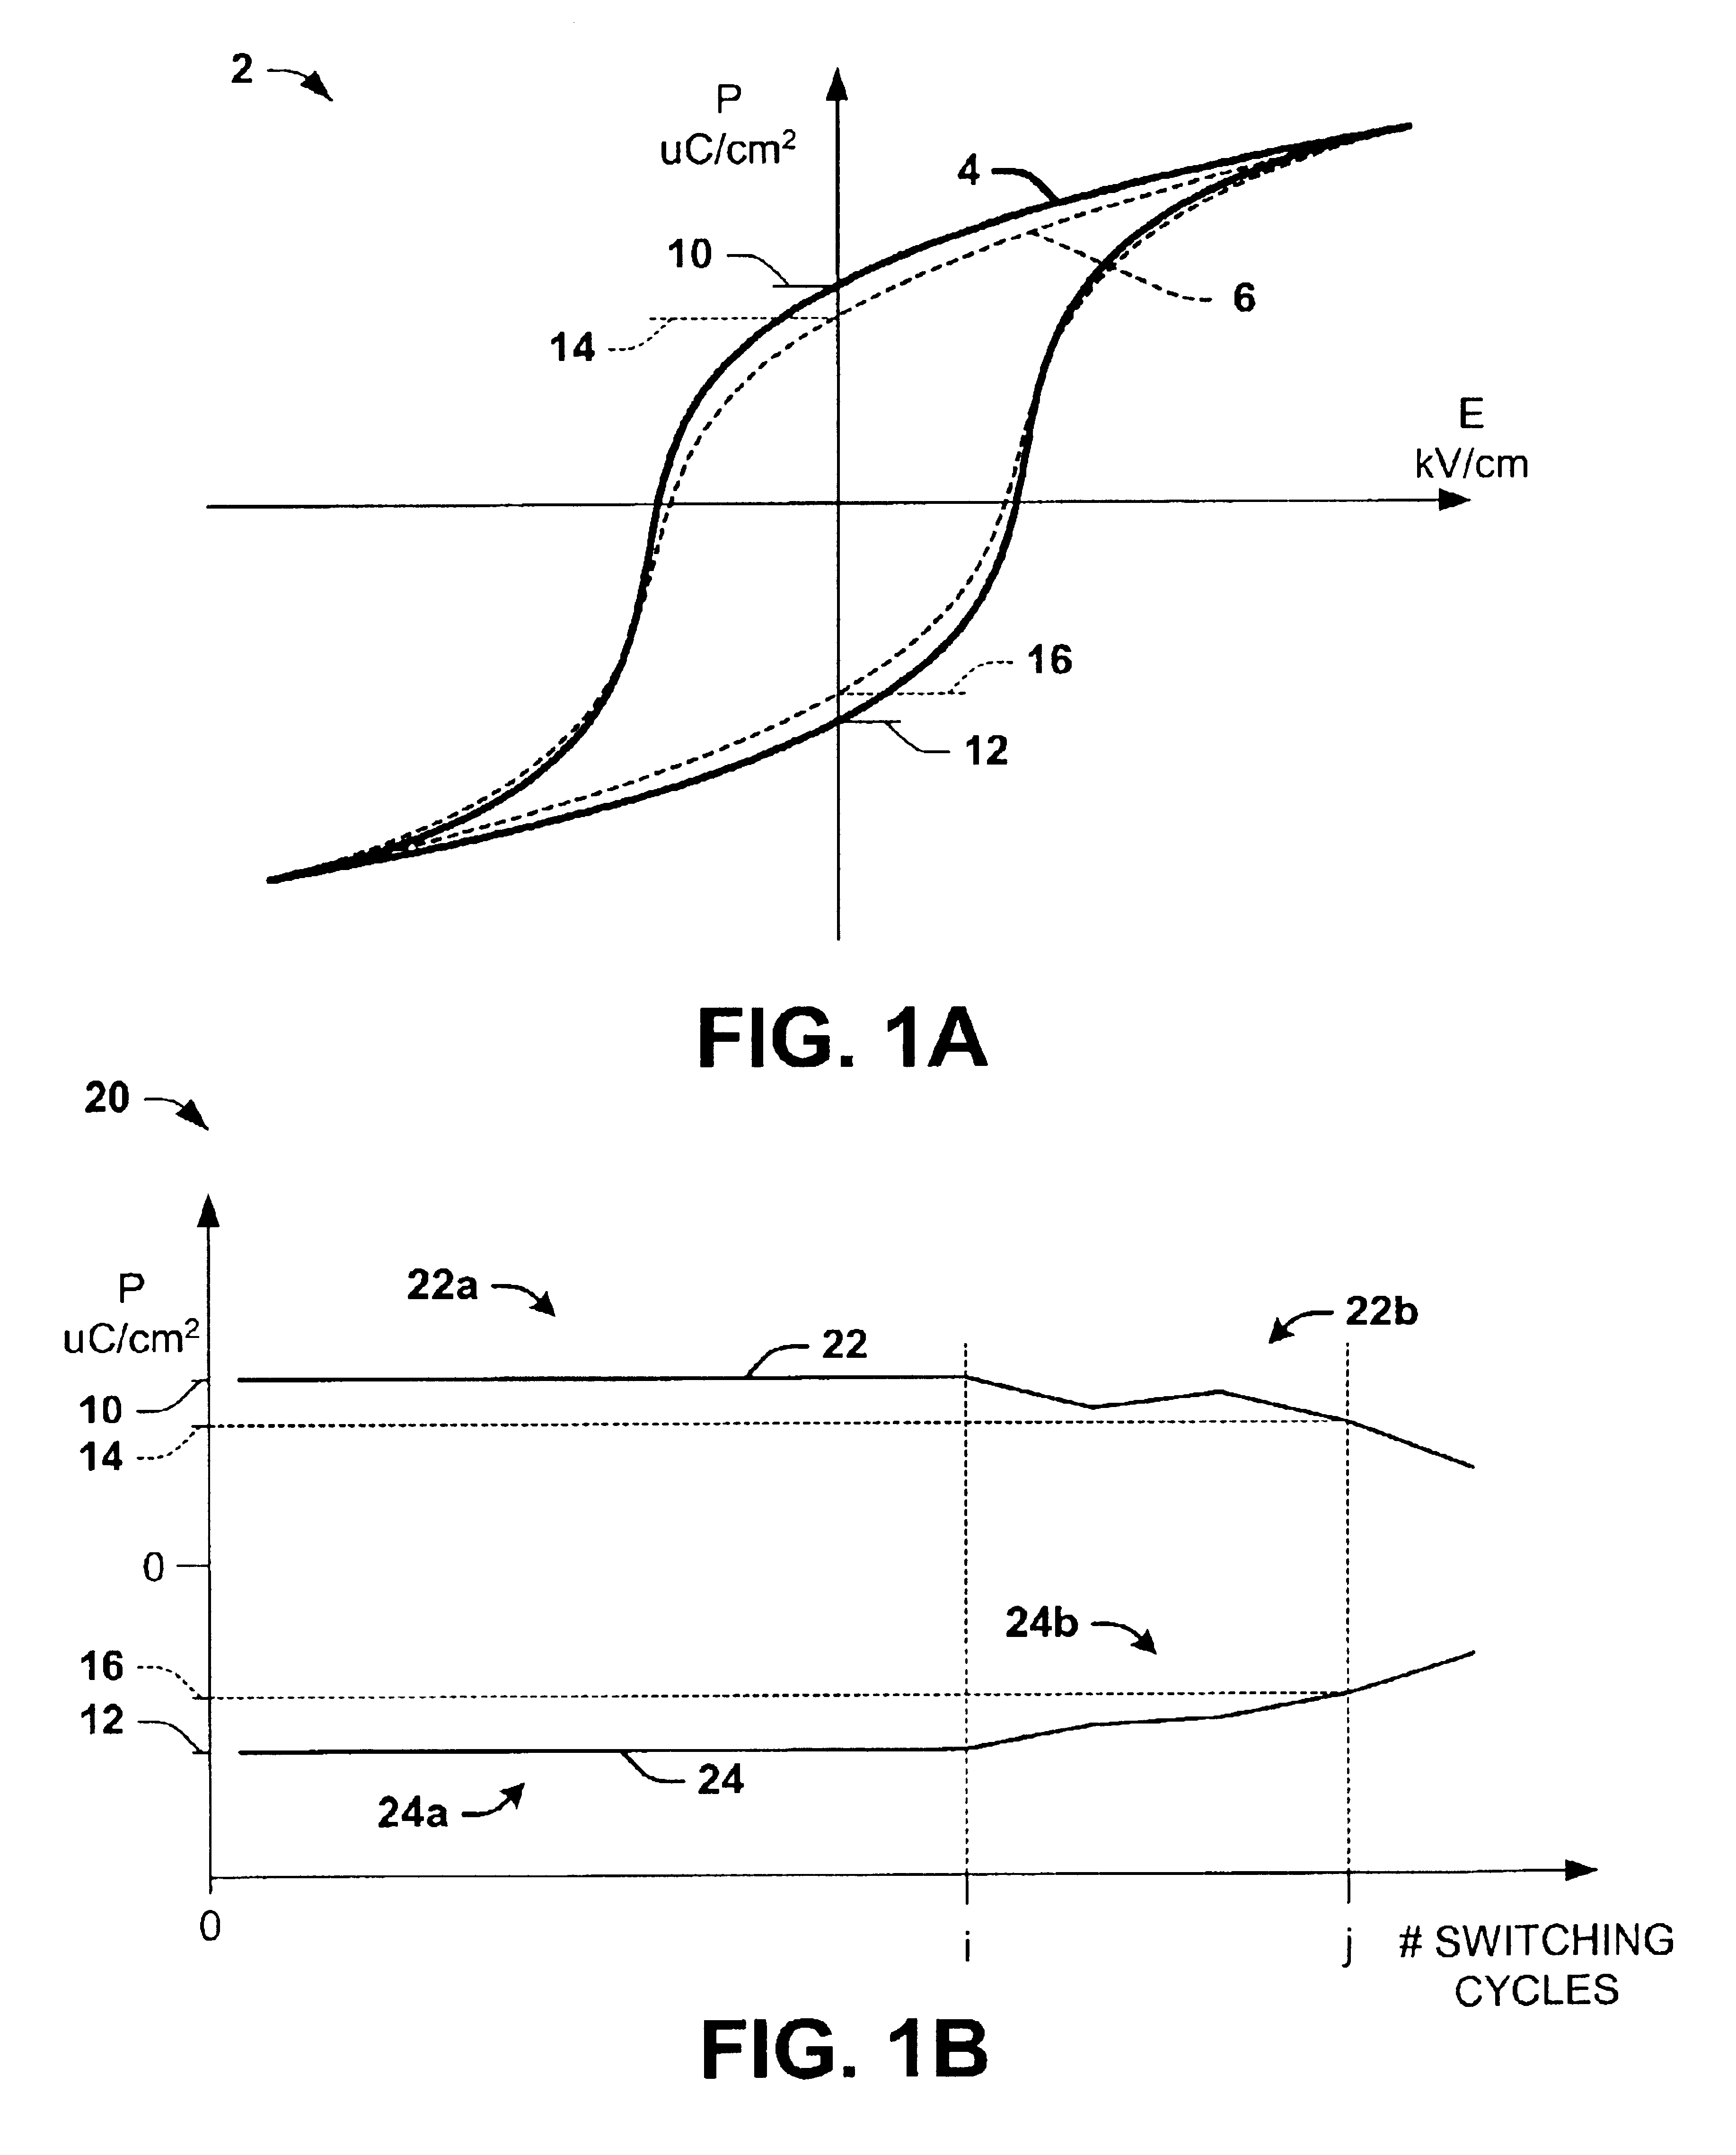 Apparatus and methods for ferroelectric ram fatigue testing